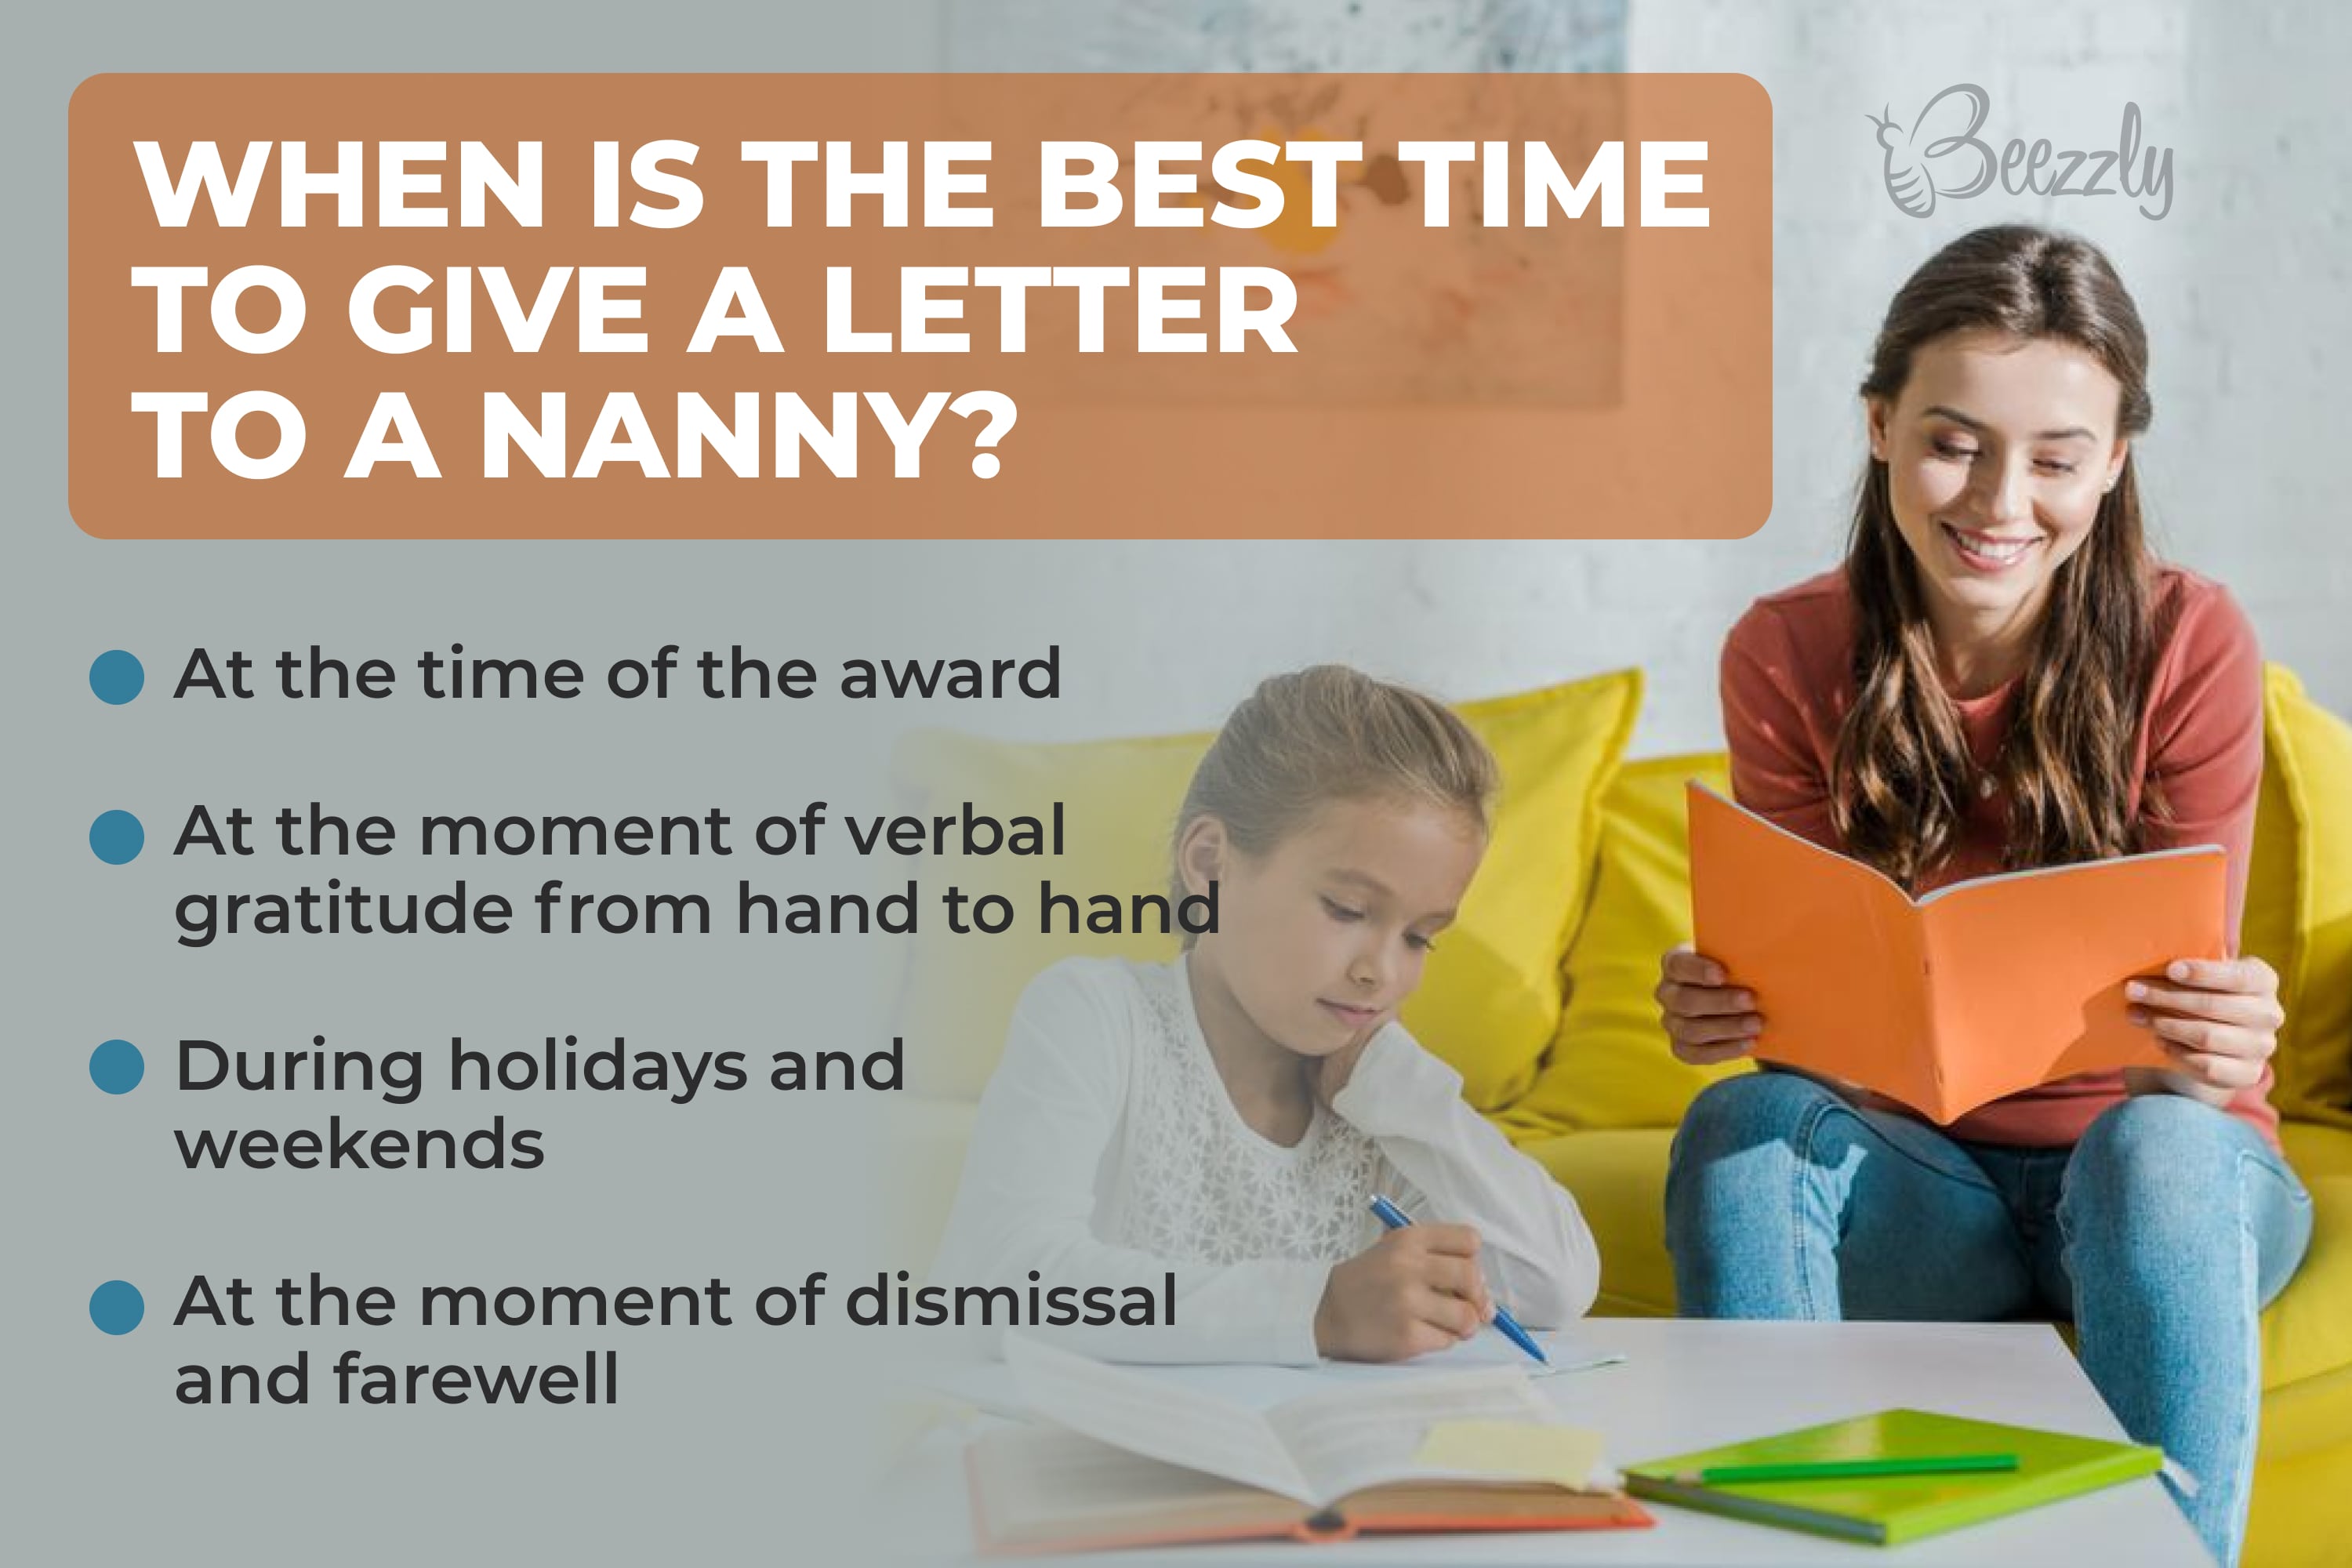 When is the best time to give a letter to a nanny